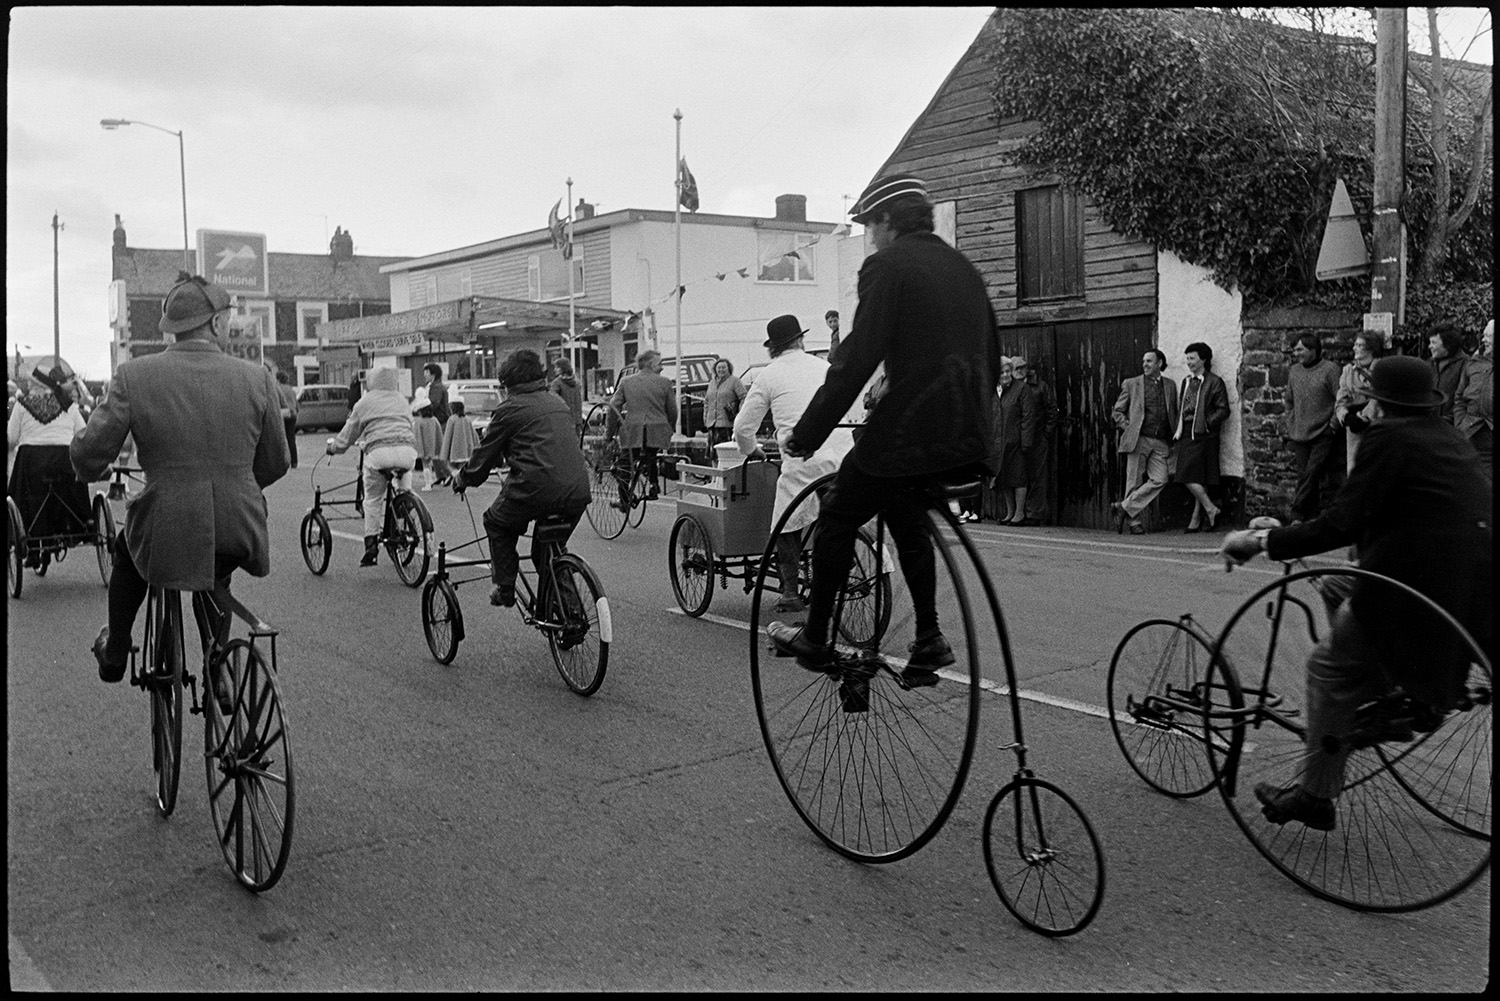 May Fair. Fancy dress parade, decorated bicycles, floats, old bicycles, penny farthing. 
[A group of people riding old bicycles, including penny farthings, in the Torrington May Fair parade. People are watching the parade from the side of the street.]